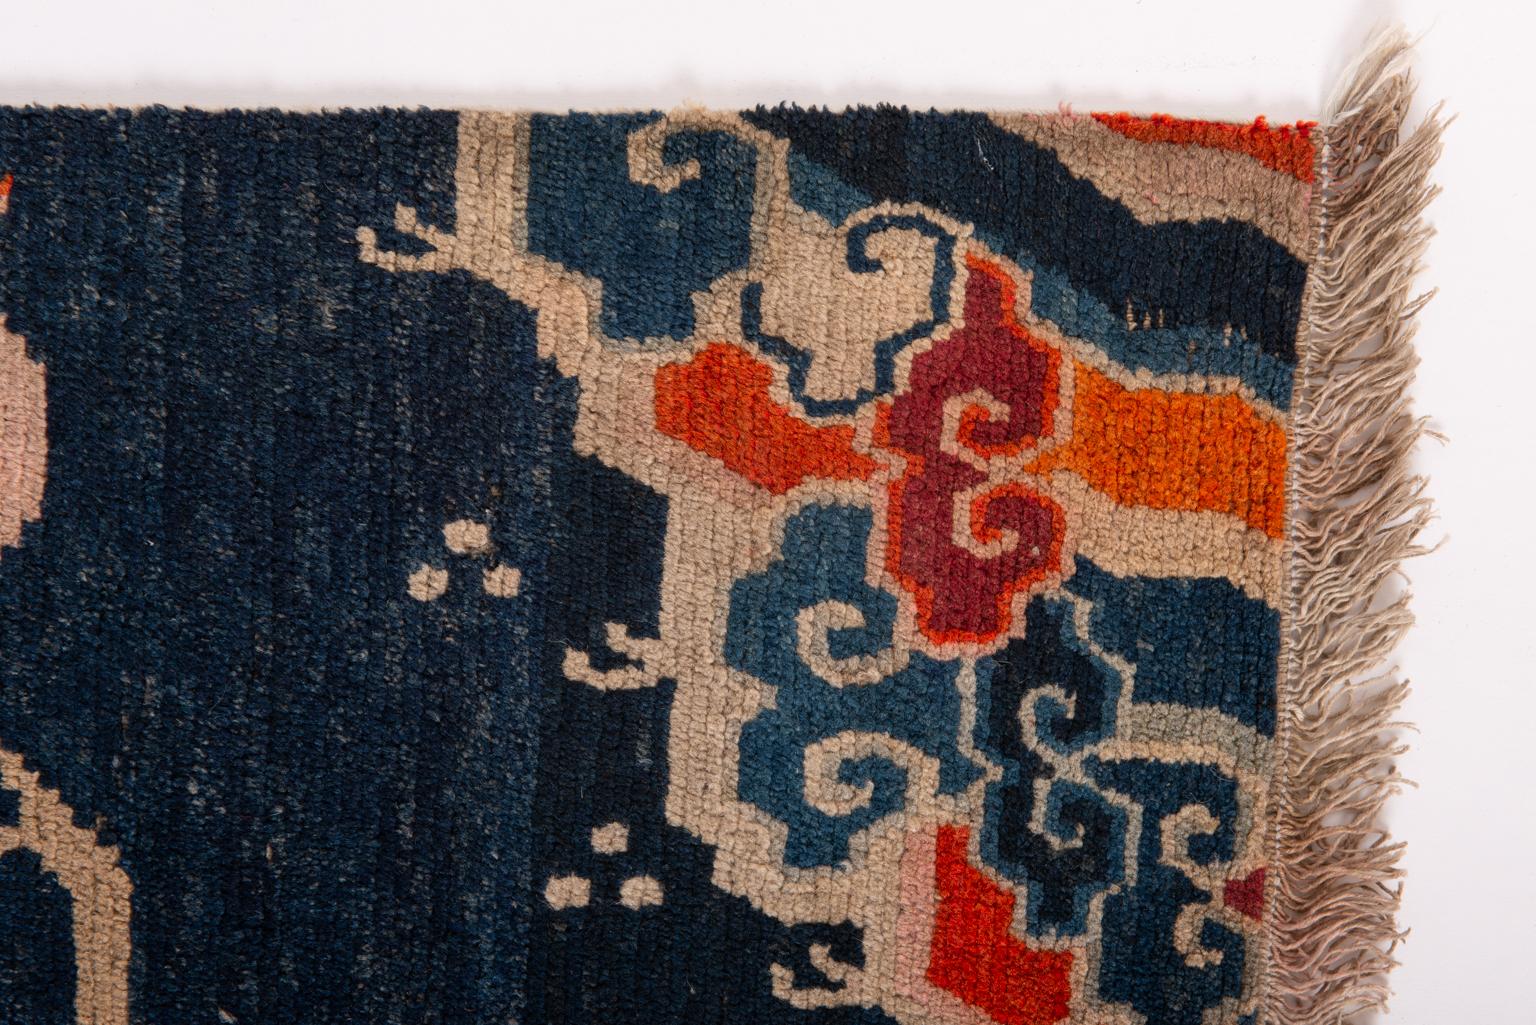 20th Century Tibetan Antique Carpet from Private Collection